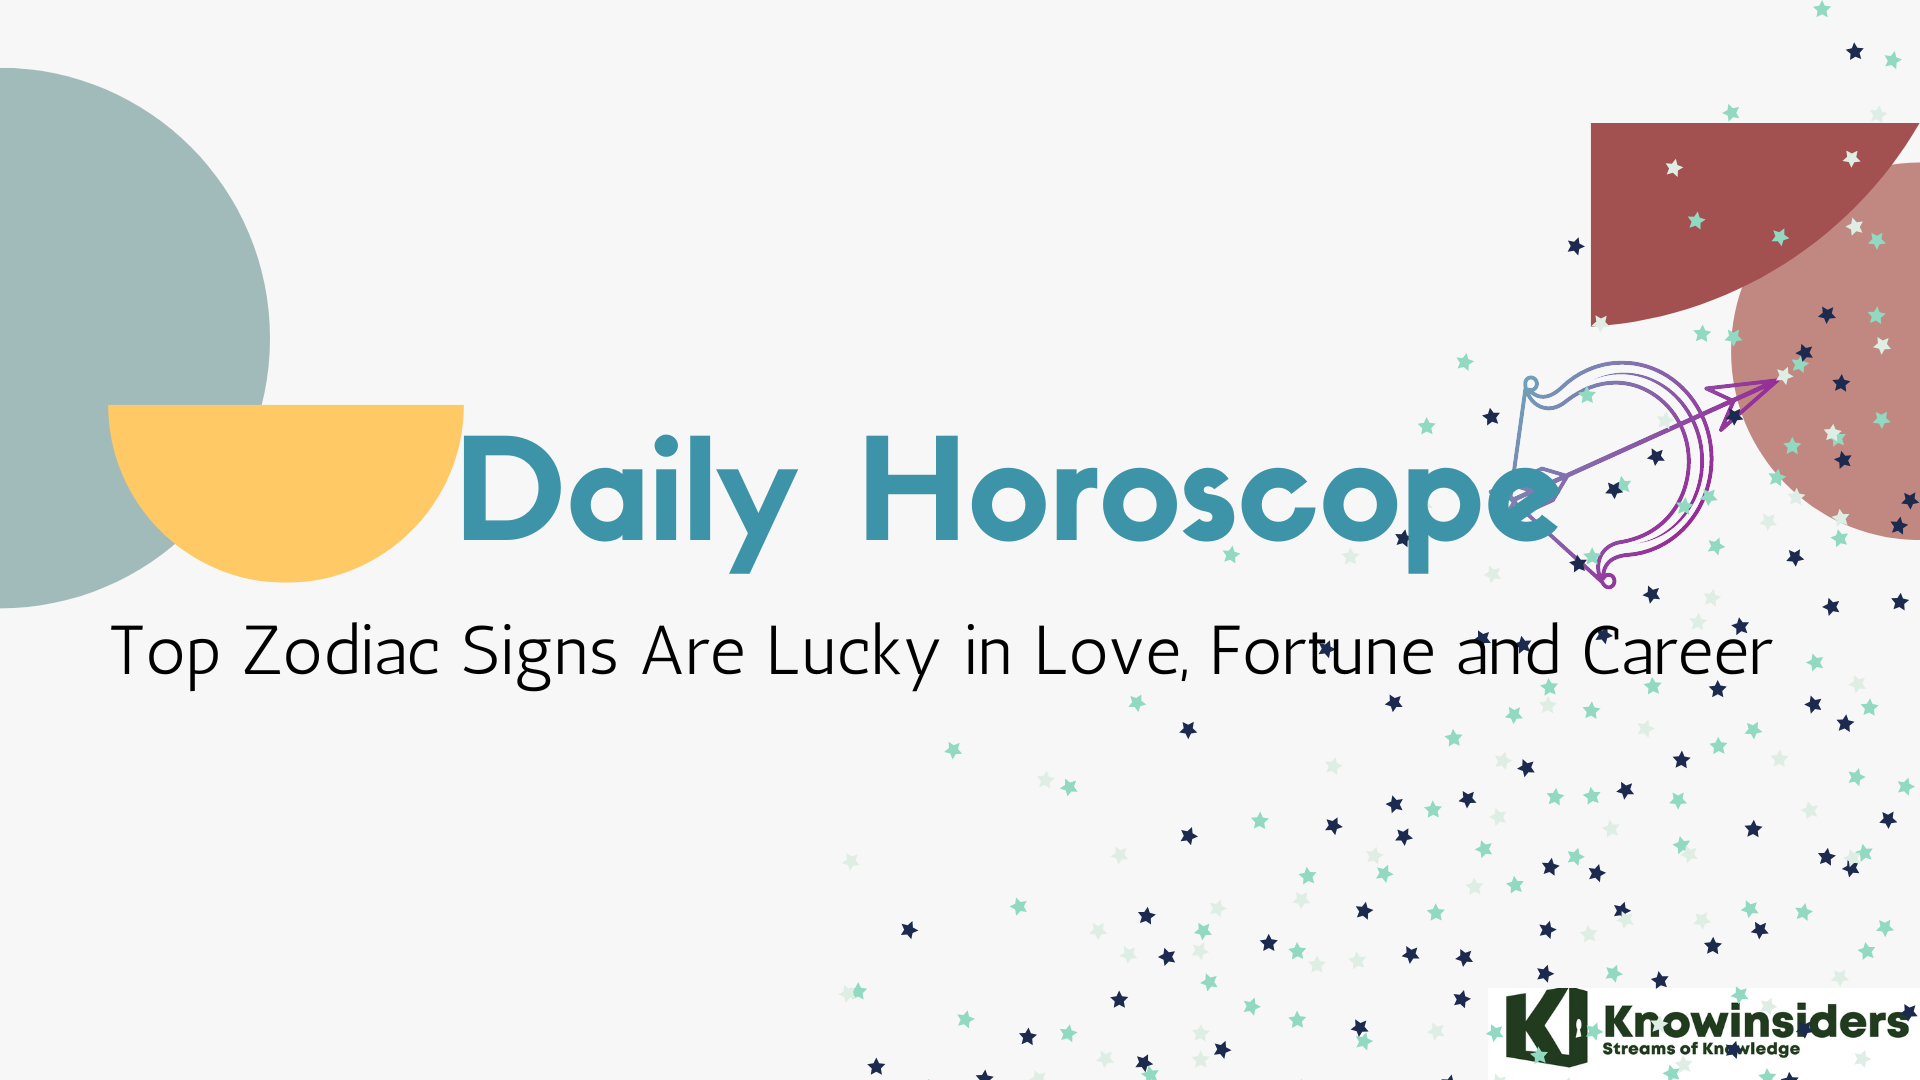 Daily Horoscope (June 17, 2022): Top Zodiac Signs Are Lucky in Love, Fortune and Career